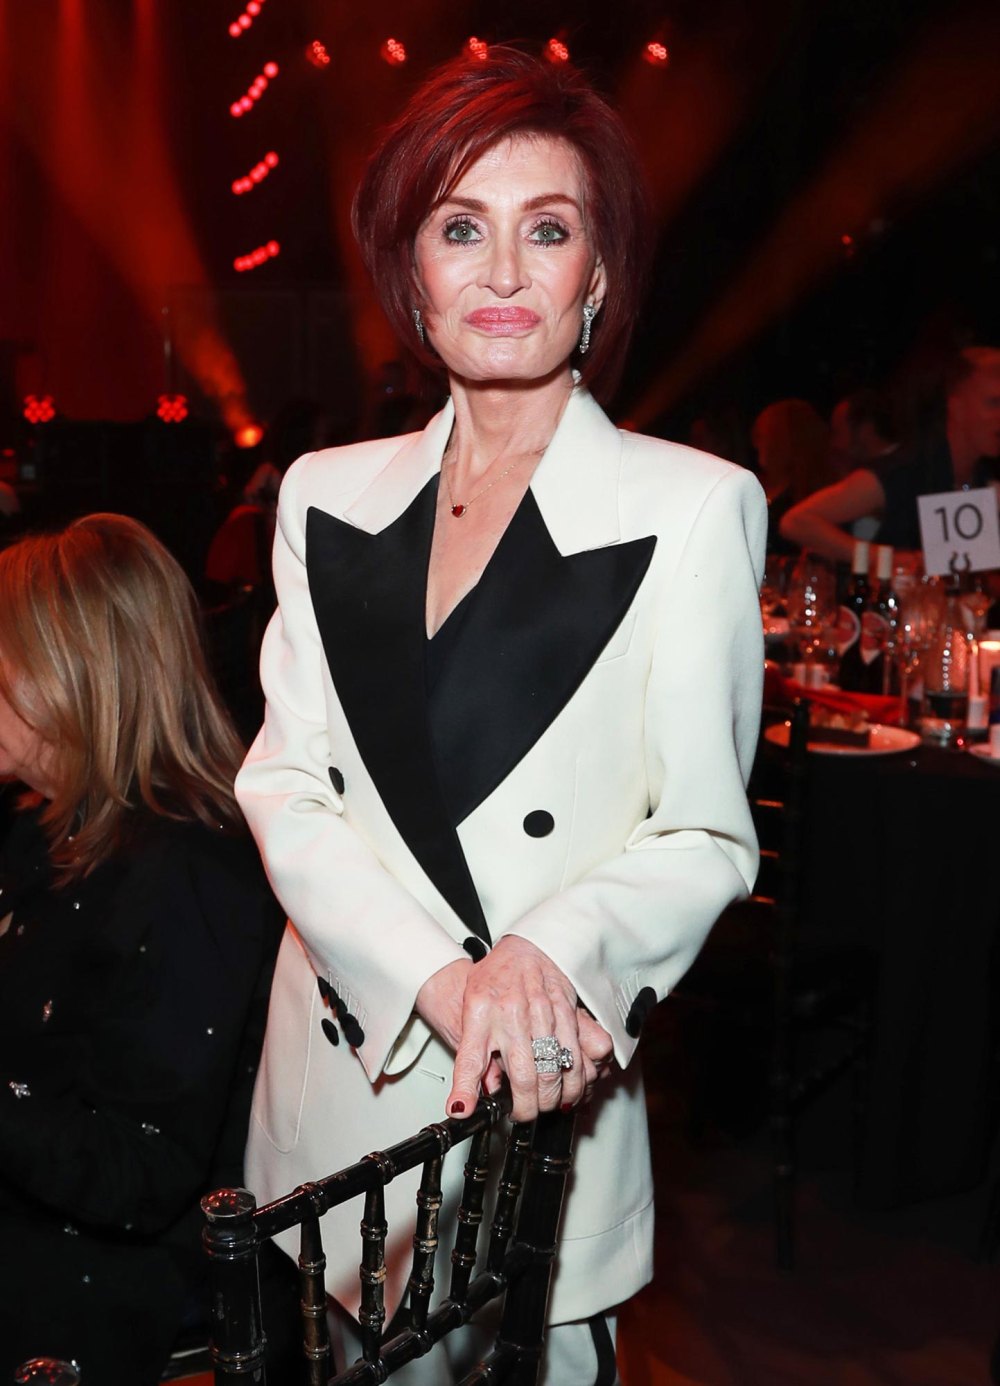 Sharon Osbourne reflects on her third facelift in 2021: the worst thing I've ever done